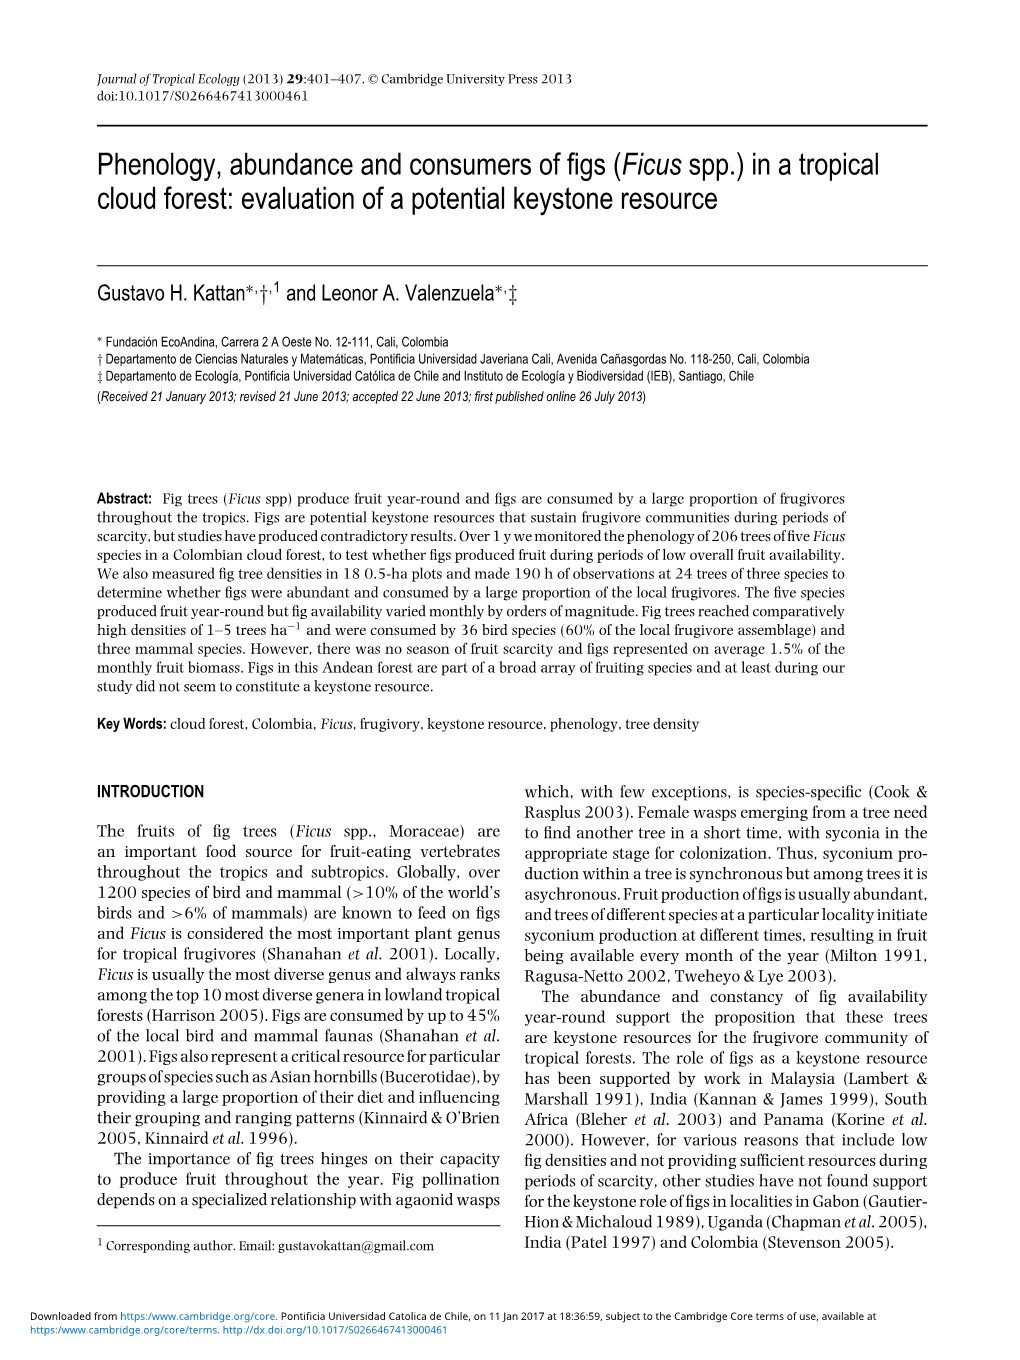 Ficus Spp.) in a Tropical Cloud Forest: Evaluation of a Potential Keystone Resource